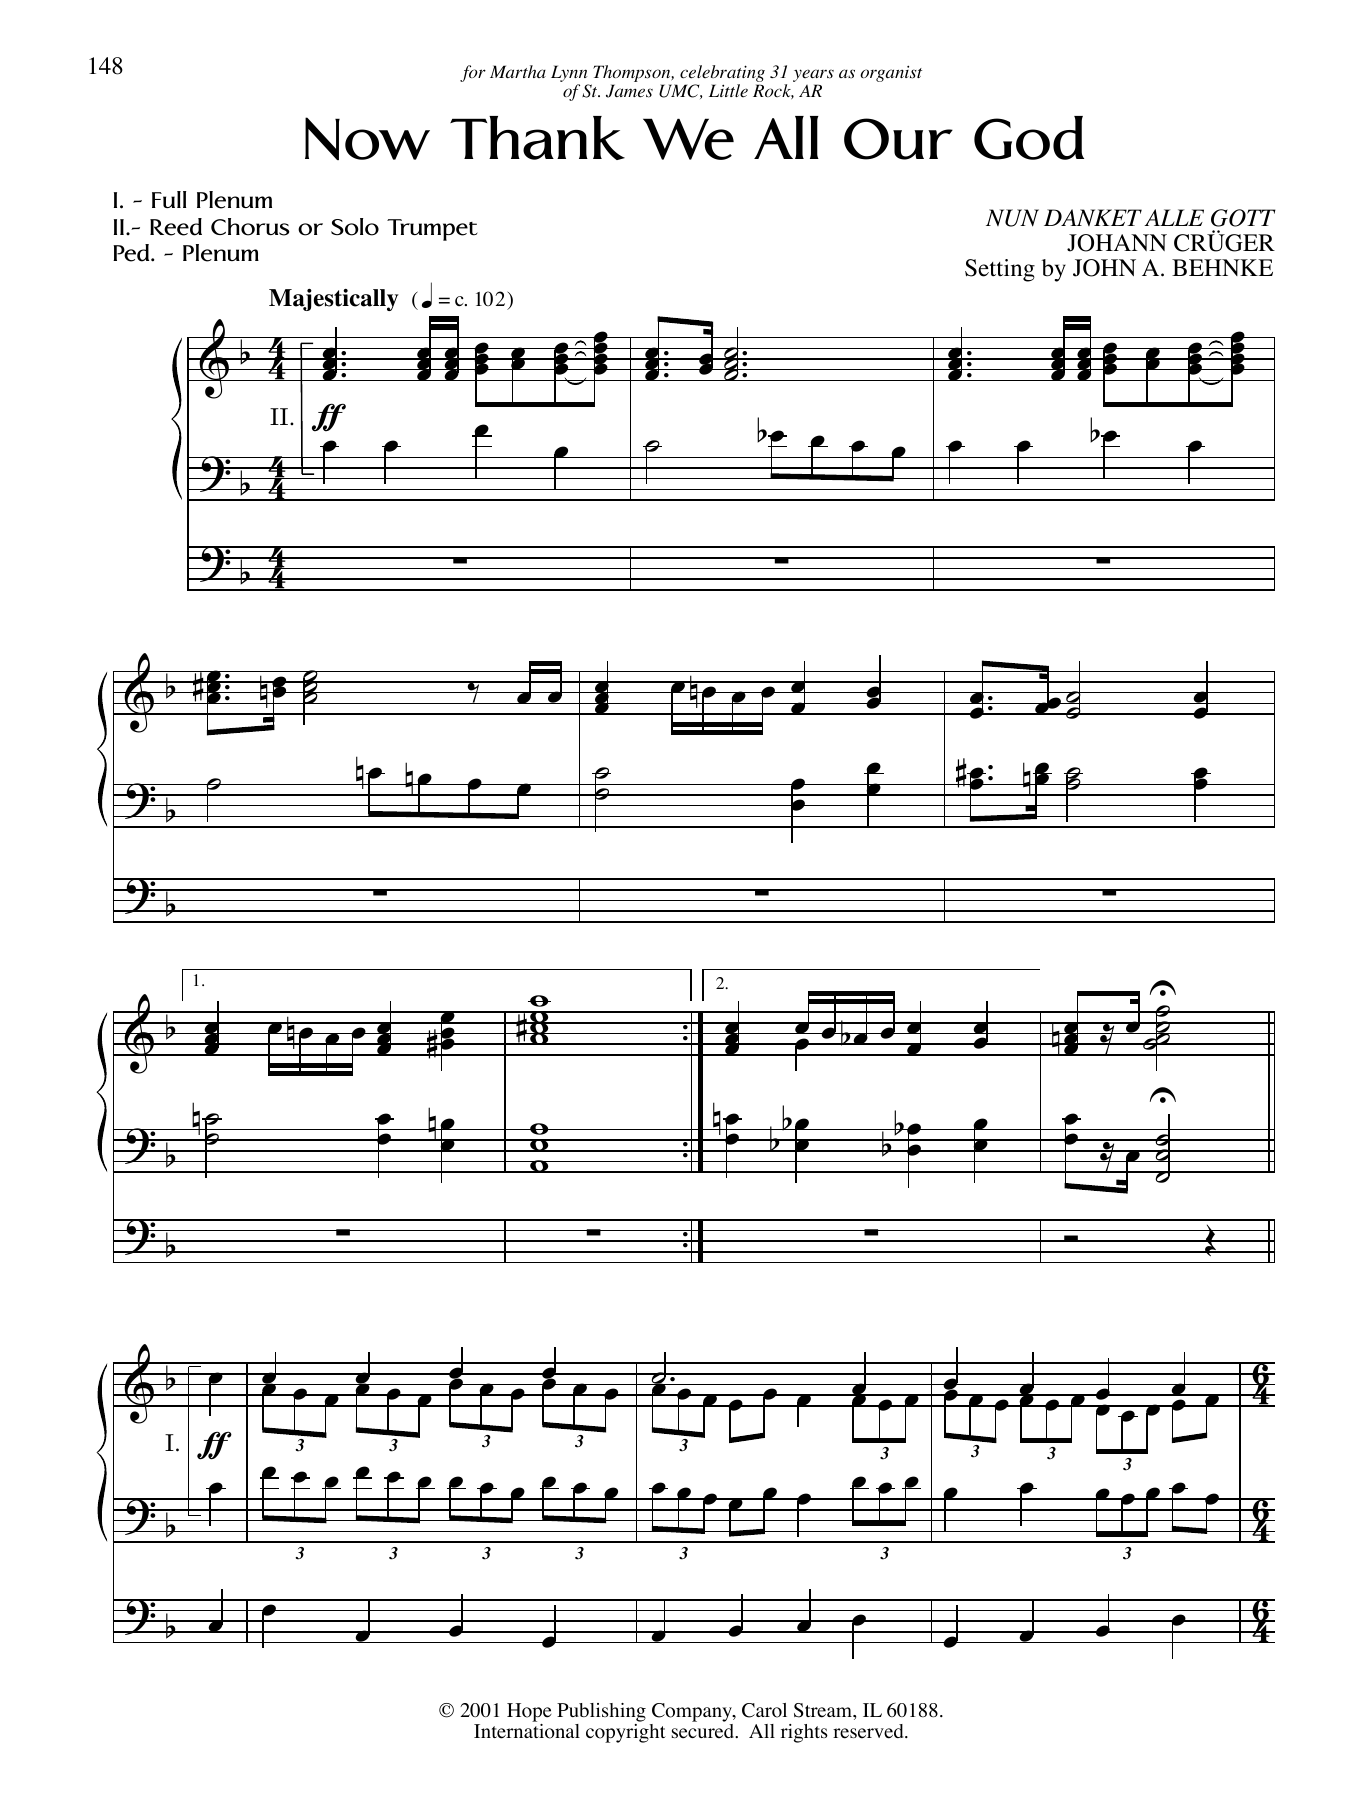 Download John A. Behnke Now Thank We All Our God Sheet Music